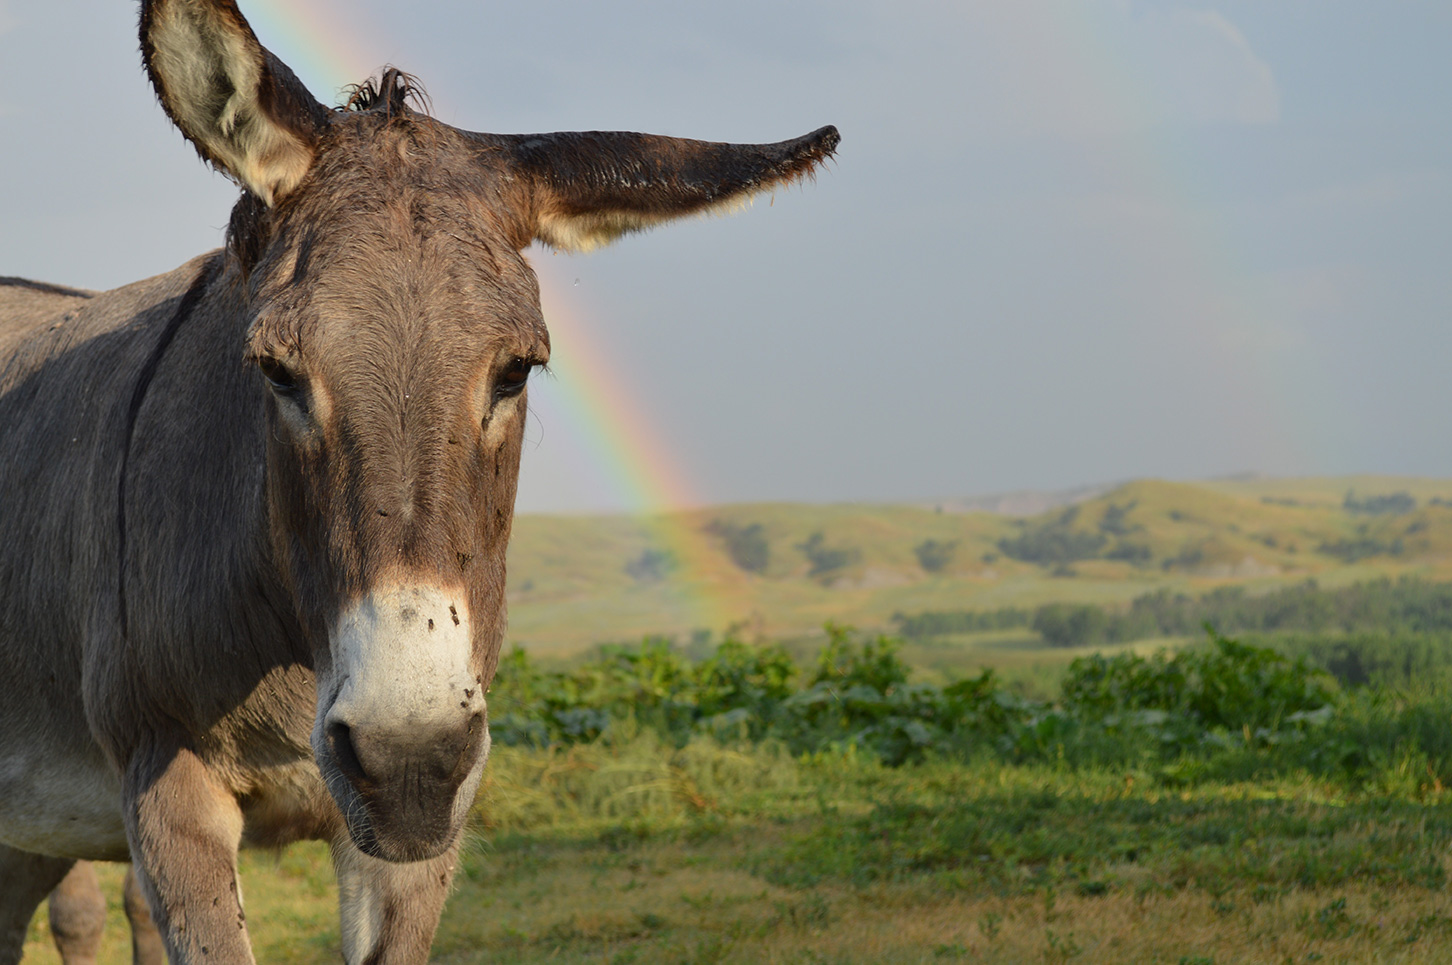 A mule starring a the camera with a rainbow in the background